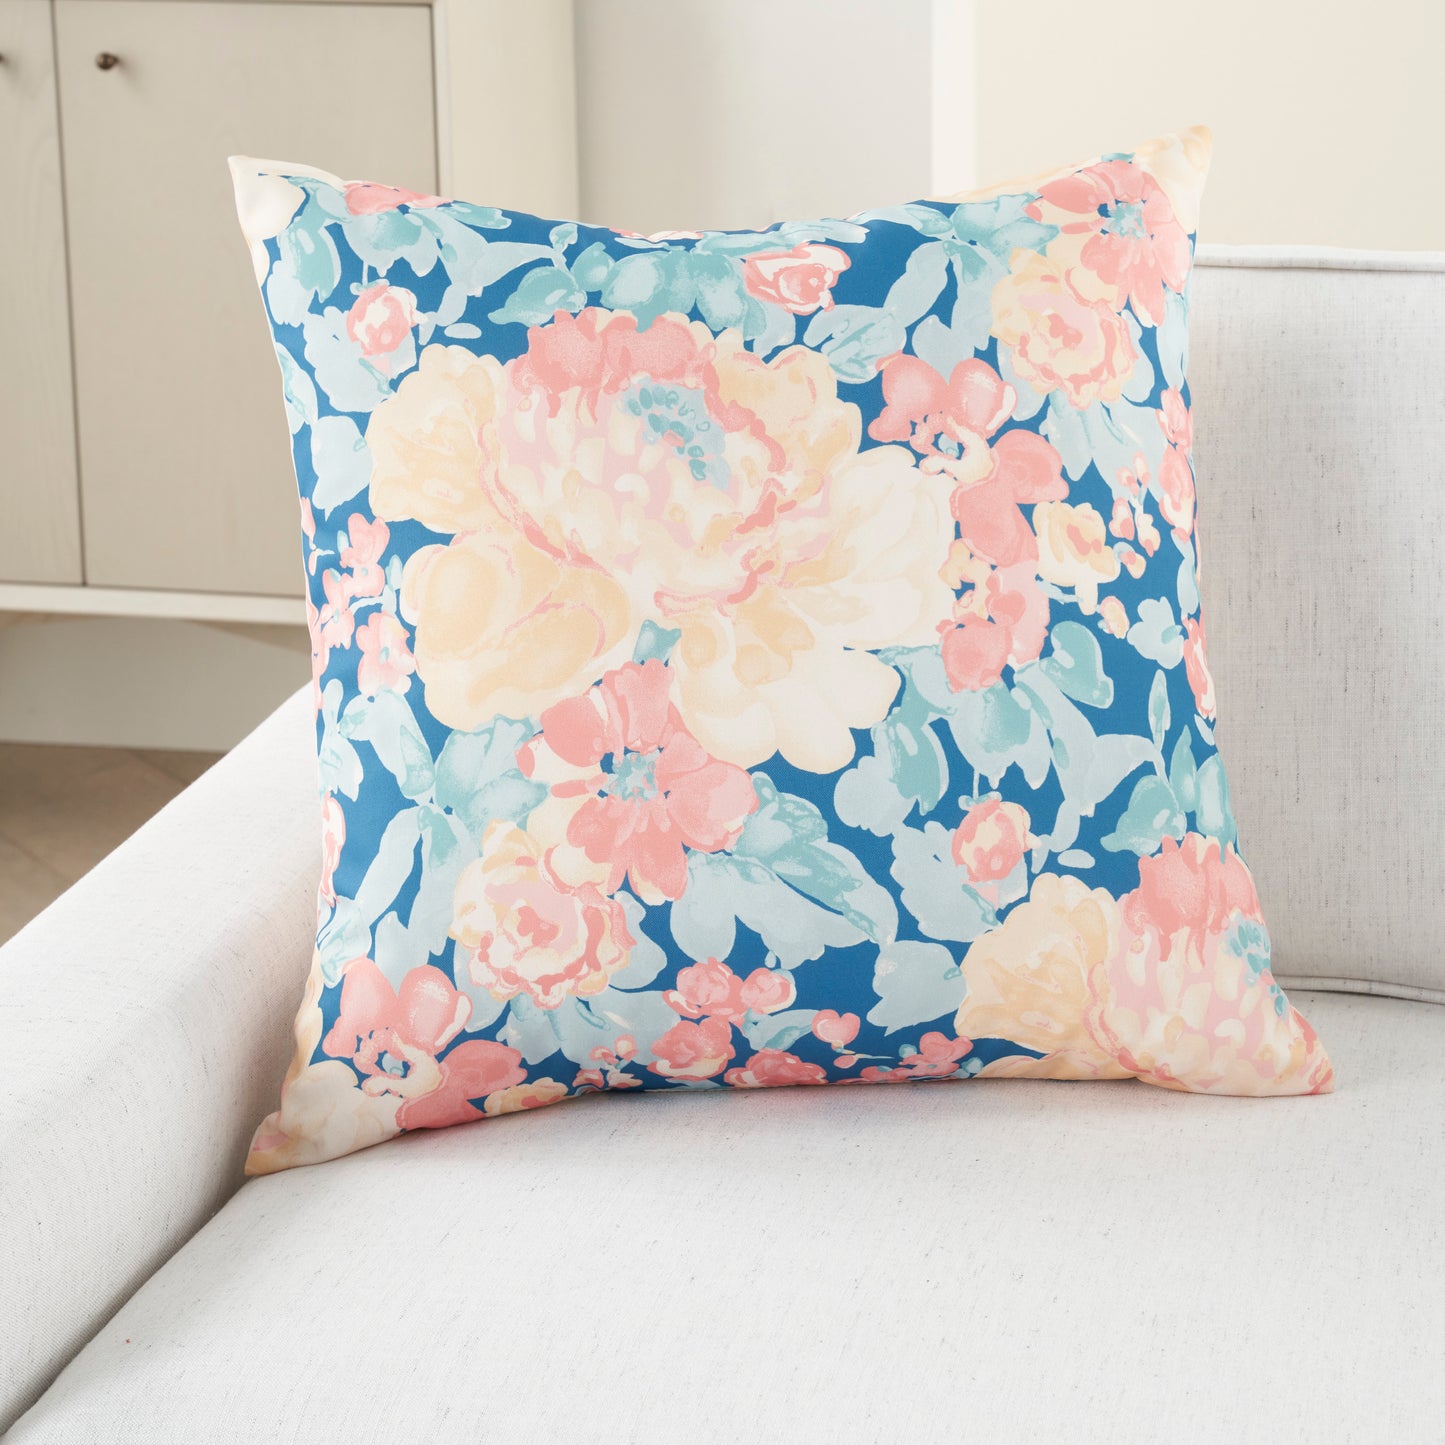 Waverly Pillows WP009 Synthetic Blend Blossom Boutique Throw Pillow From Waverly By Nourison Rugs